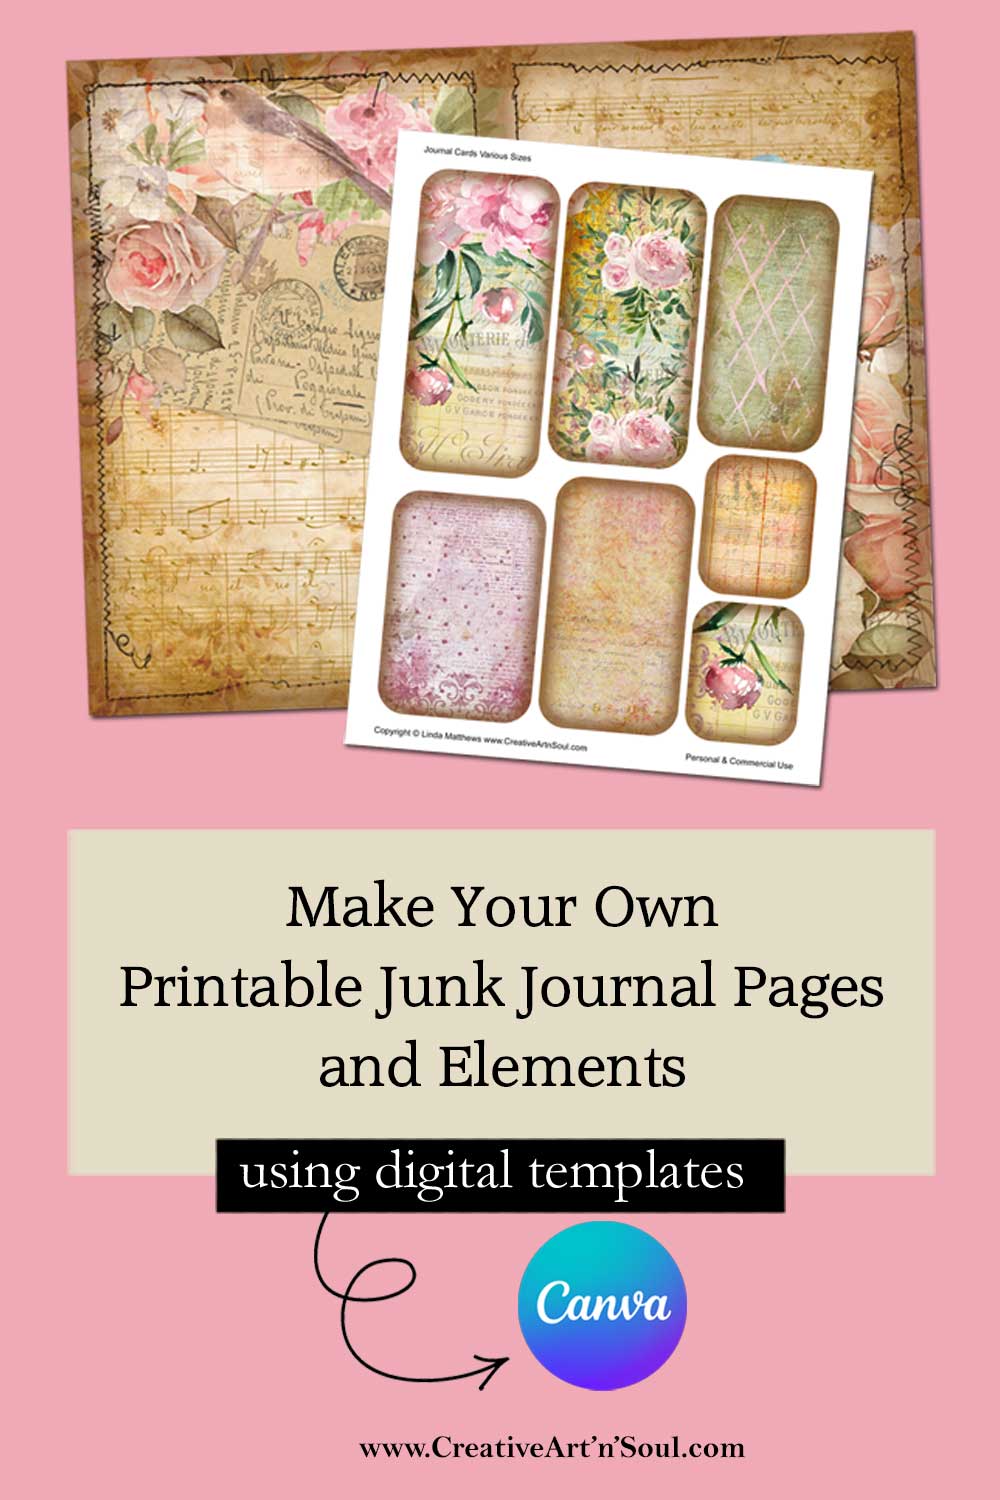 How to make Printable Junk Journal Pages with Stitched Edges